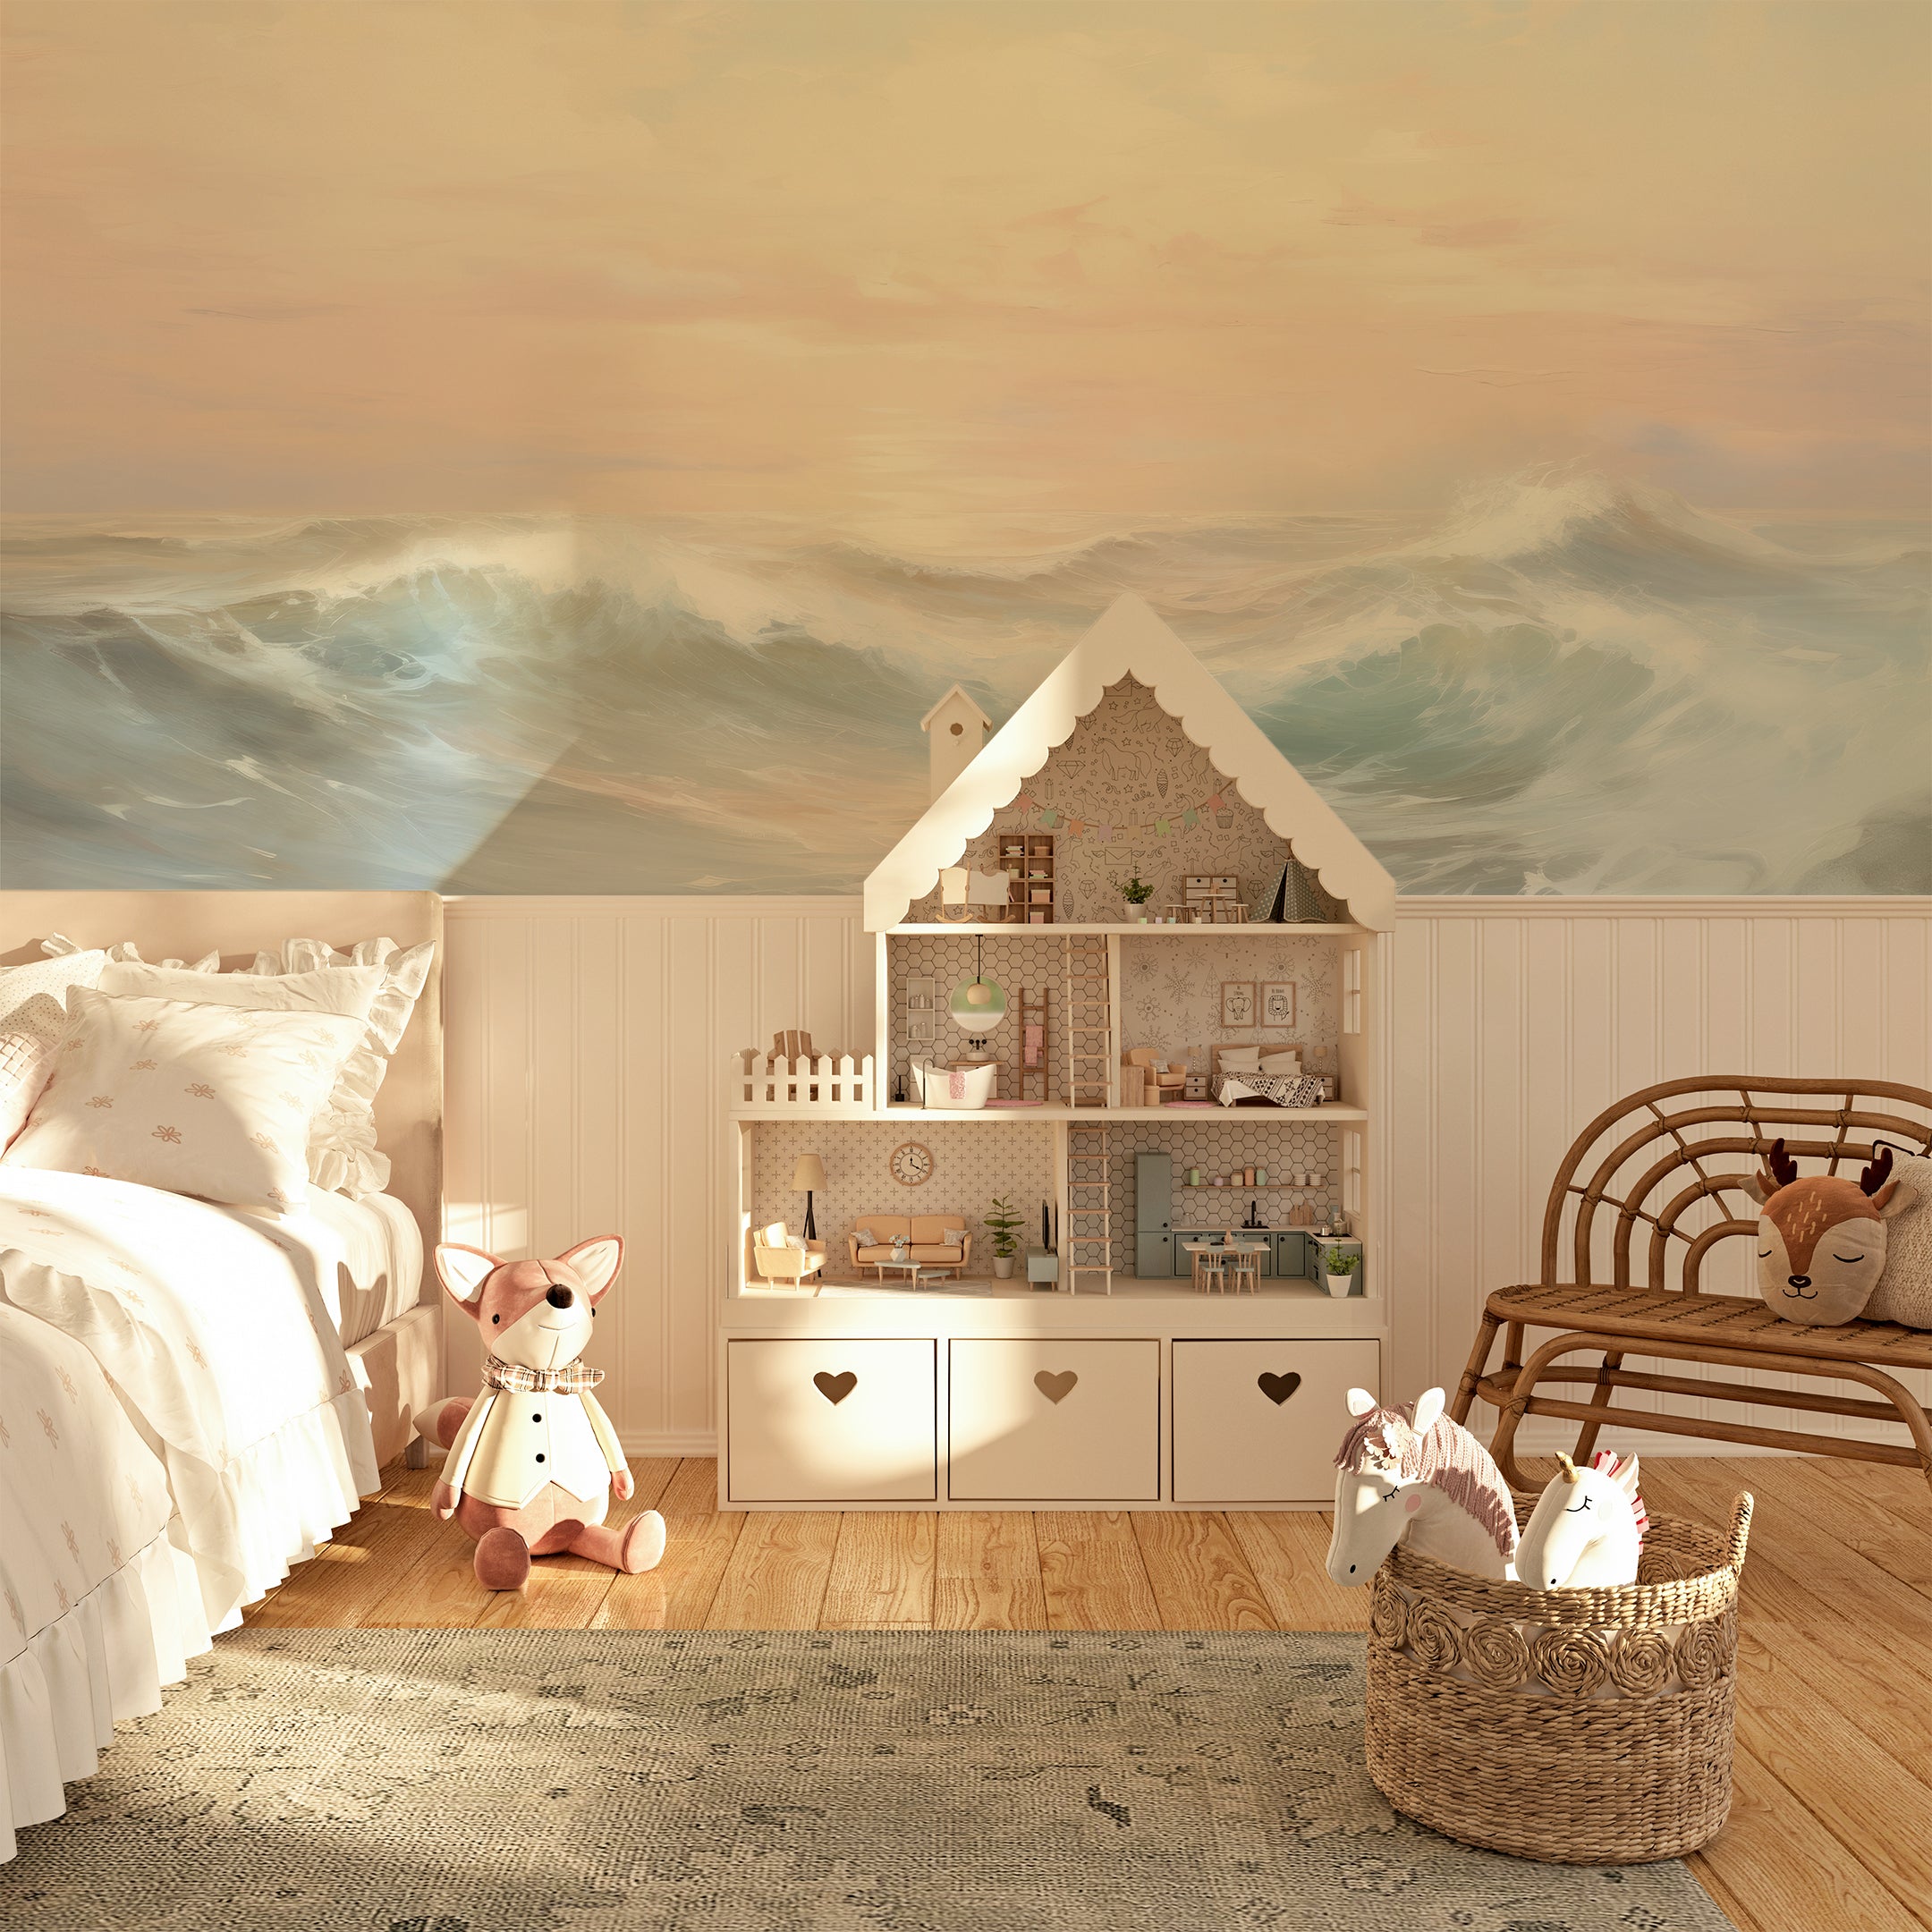 Victoria by the Sea wallpaper installed in a cozy bedroom